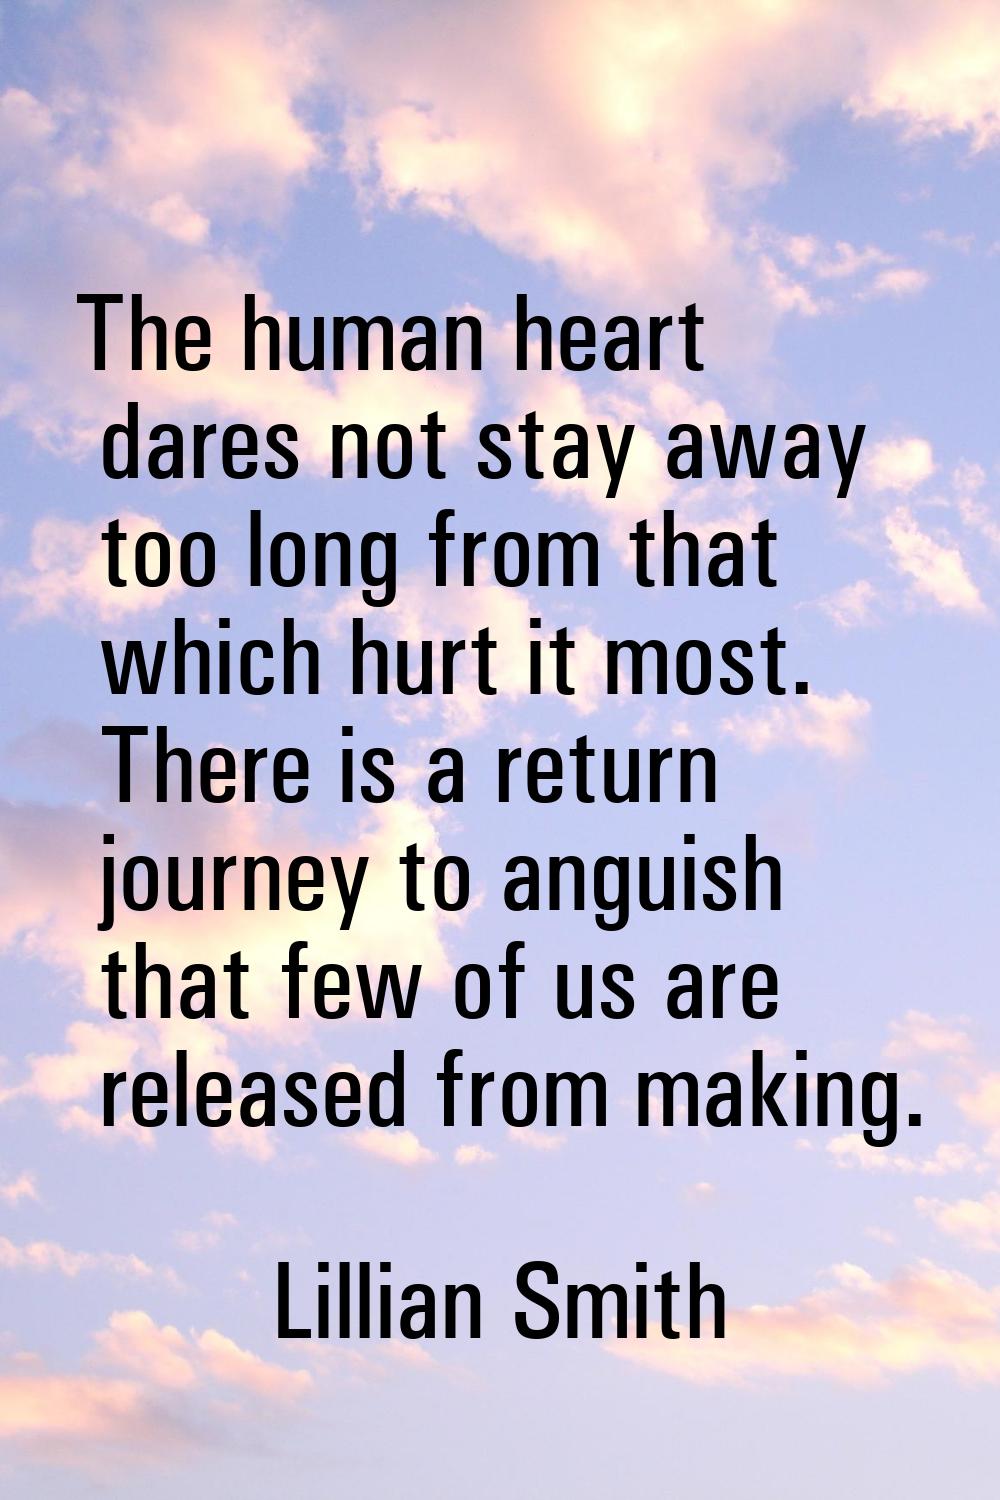 The human heart dares not stay away too long from that which hurt it most. There is a return journe